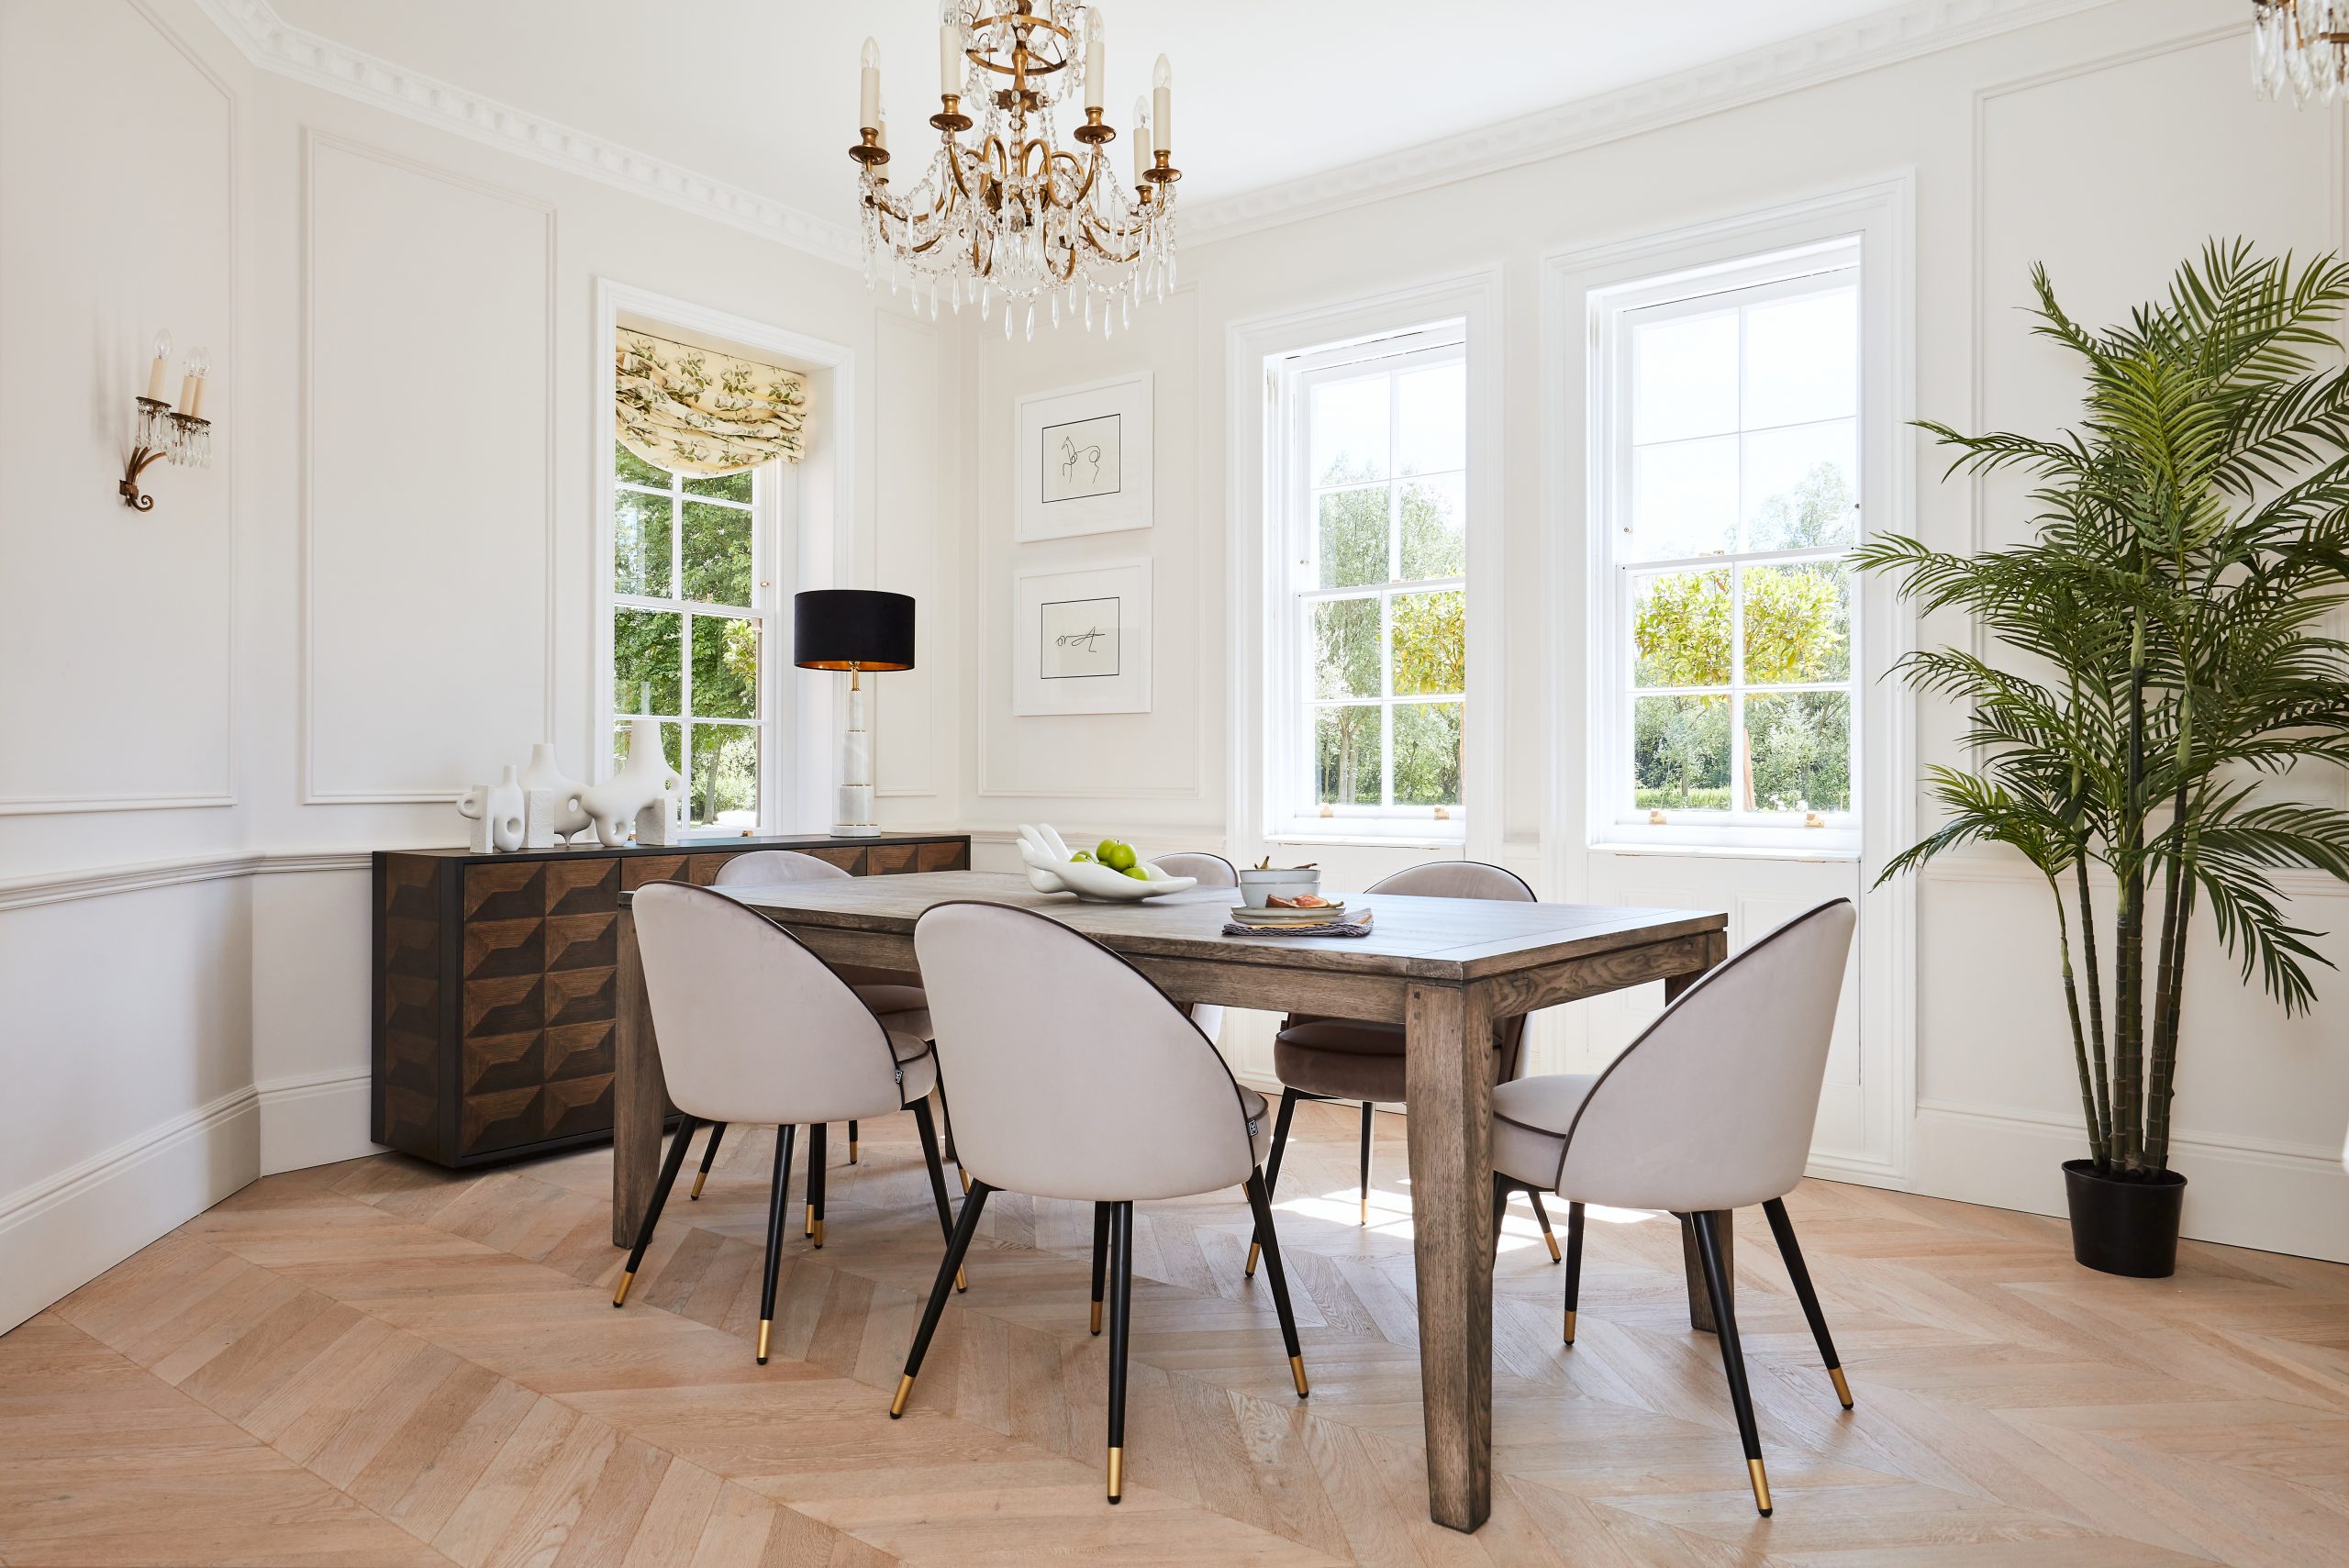 A luxurious contemporary lifestyle dining area
